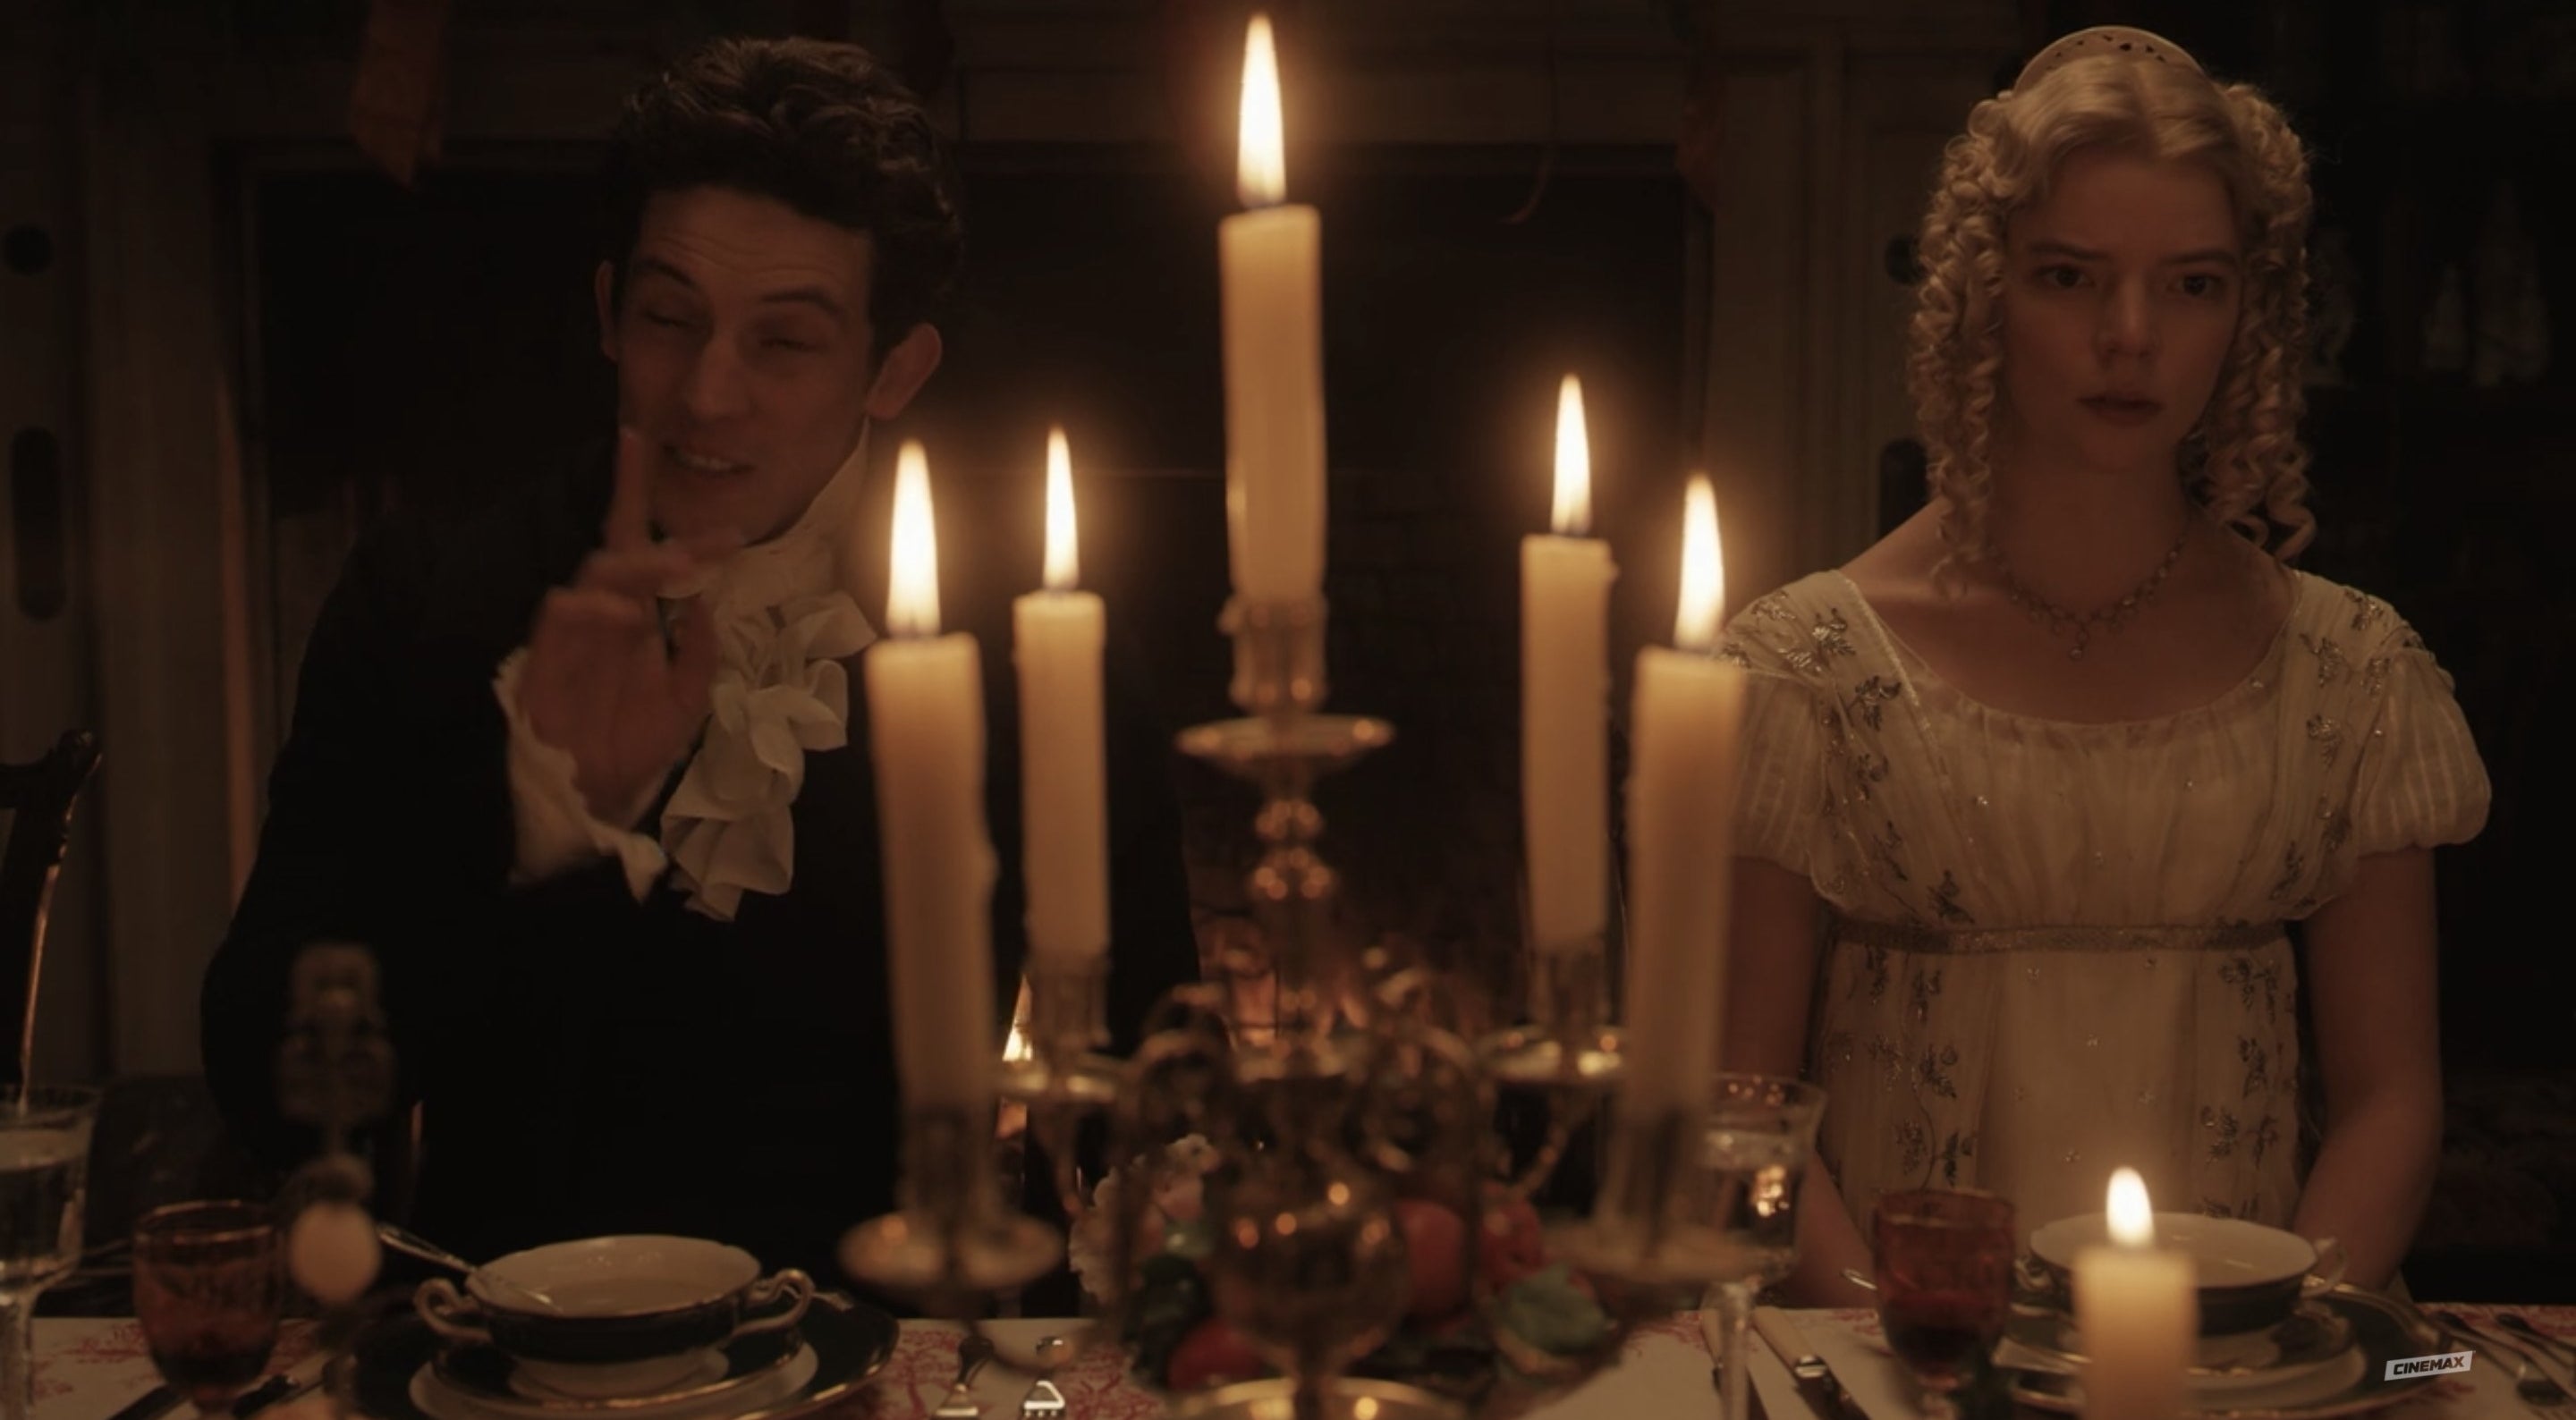 Emma looks especially over it at dinner as she sits next to the vicar, a candle separating the two